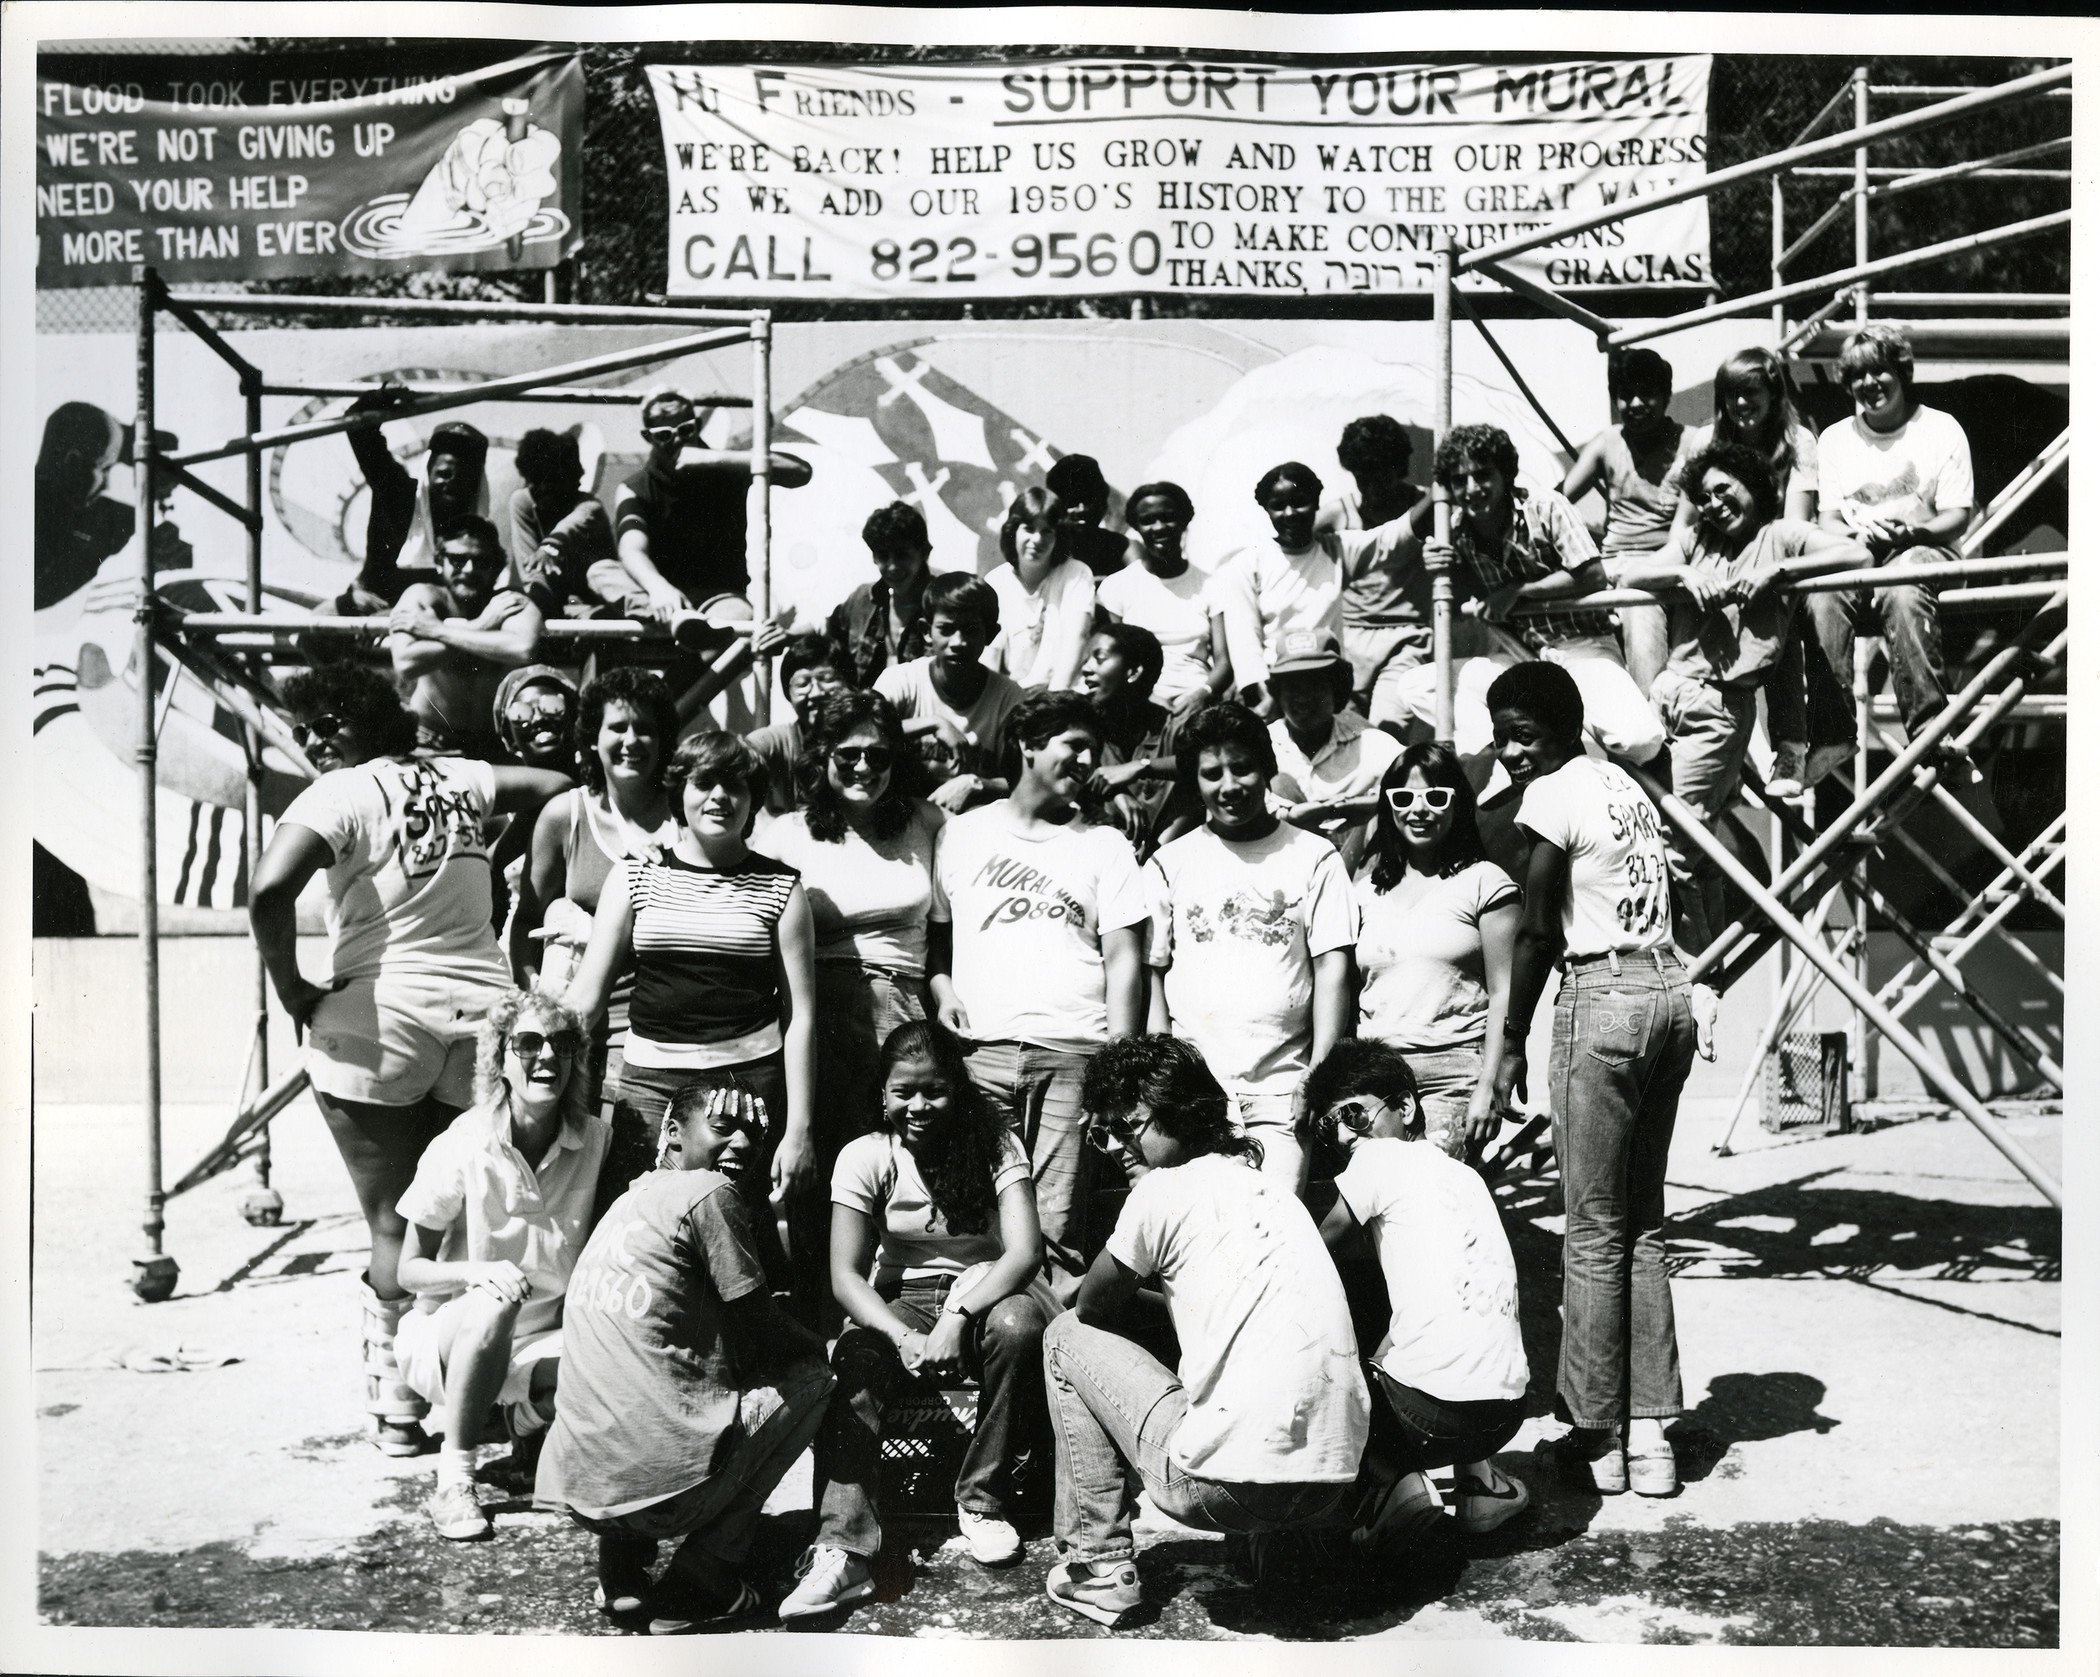  Support your mural group shot,&nbsp;© SPARC 1983, courtesy of Judith F. Baca and the SPARC archives. Photo: Gia Roland, 1983.&nbsp; 